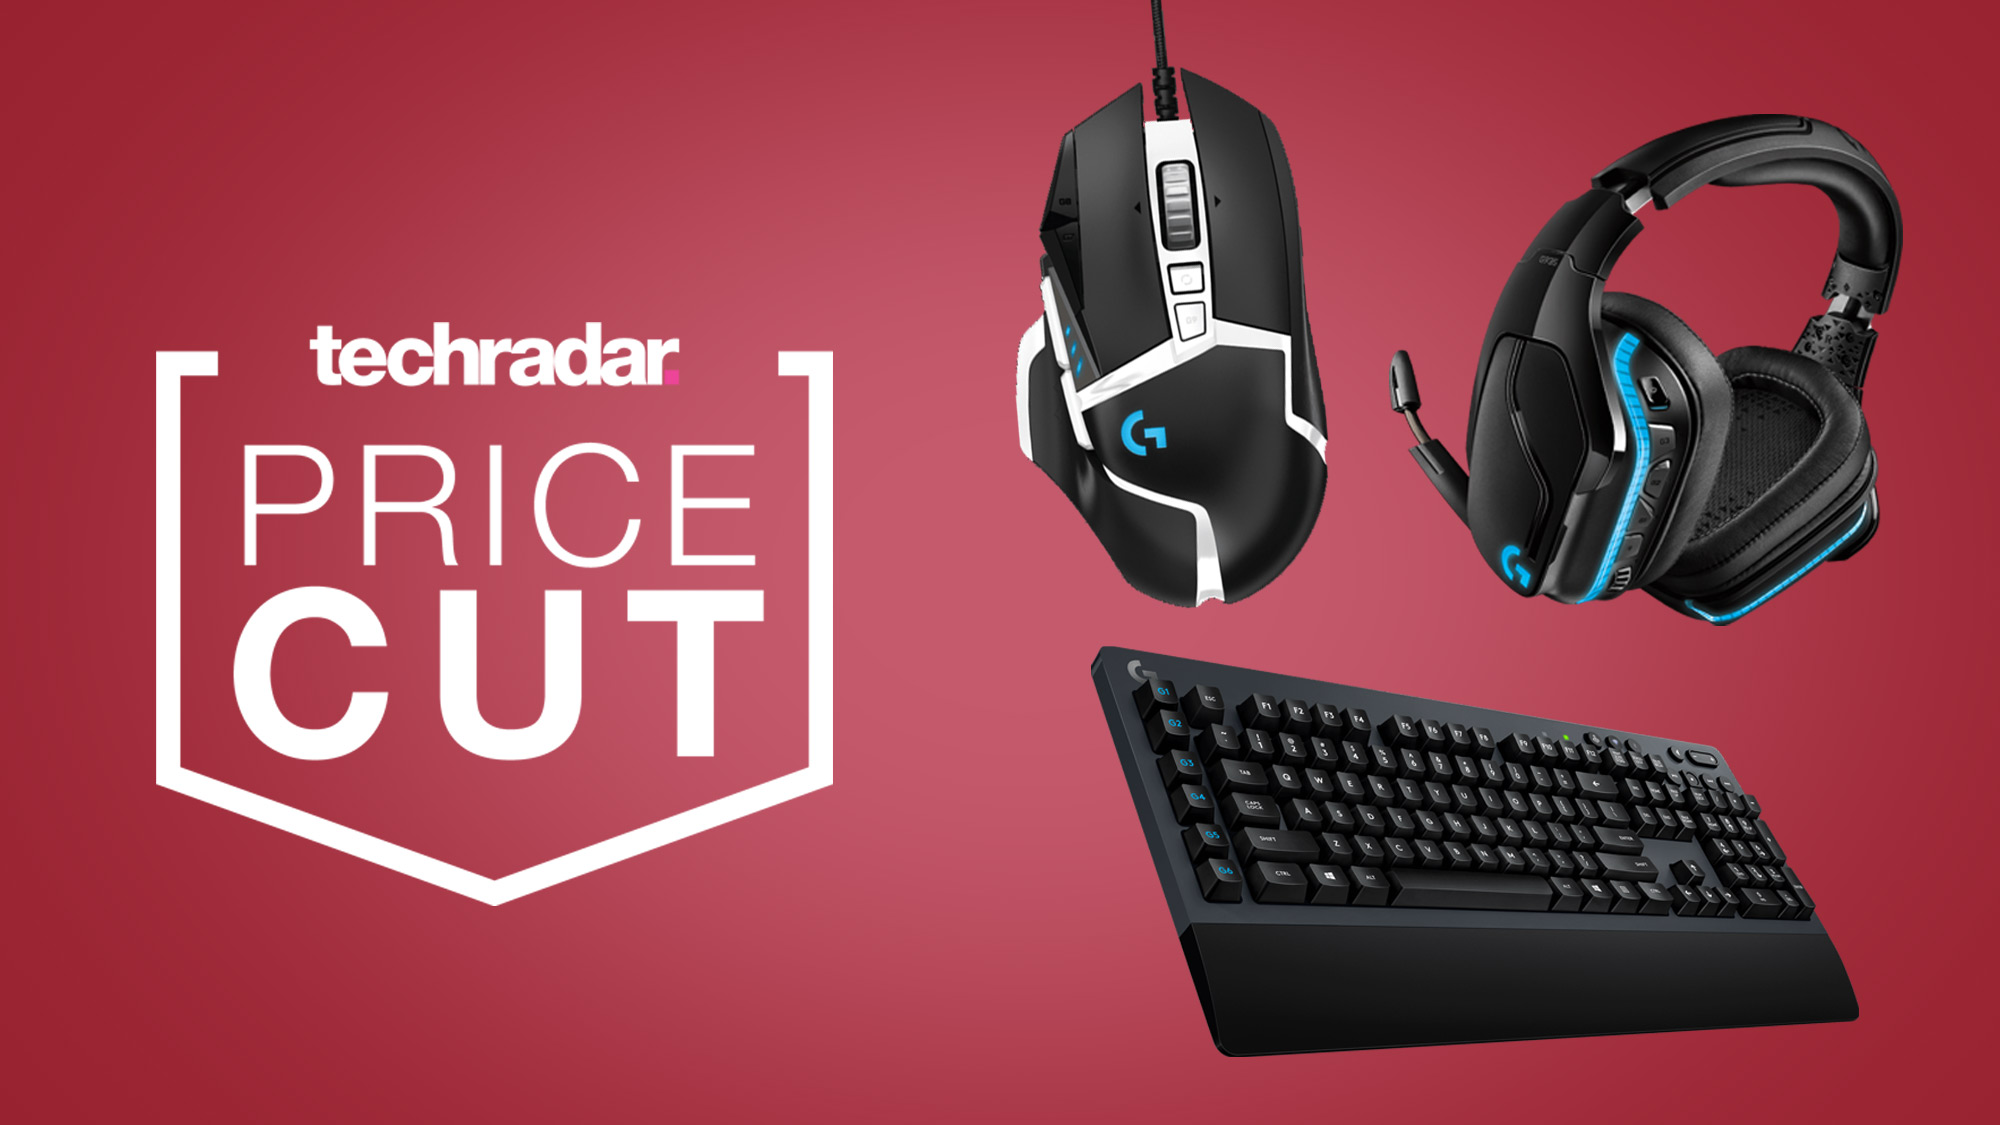 Logitech PC gaming accessories on sale: Shop keyboards, headsets